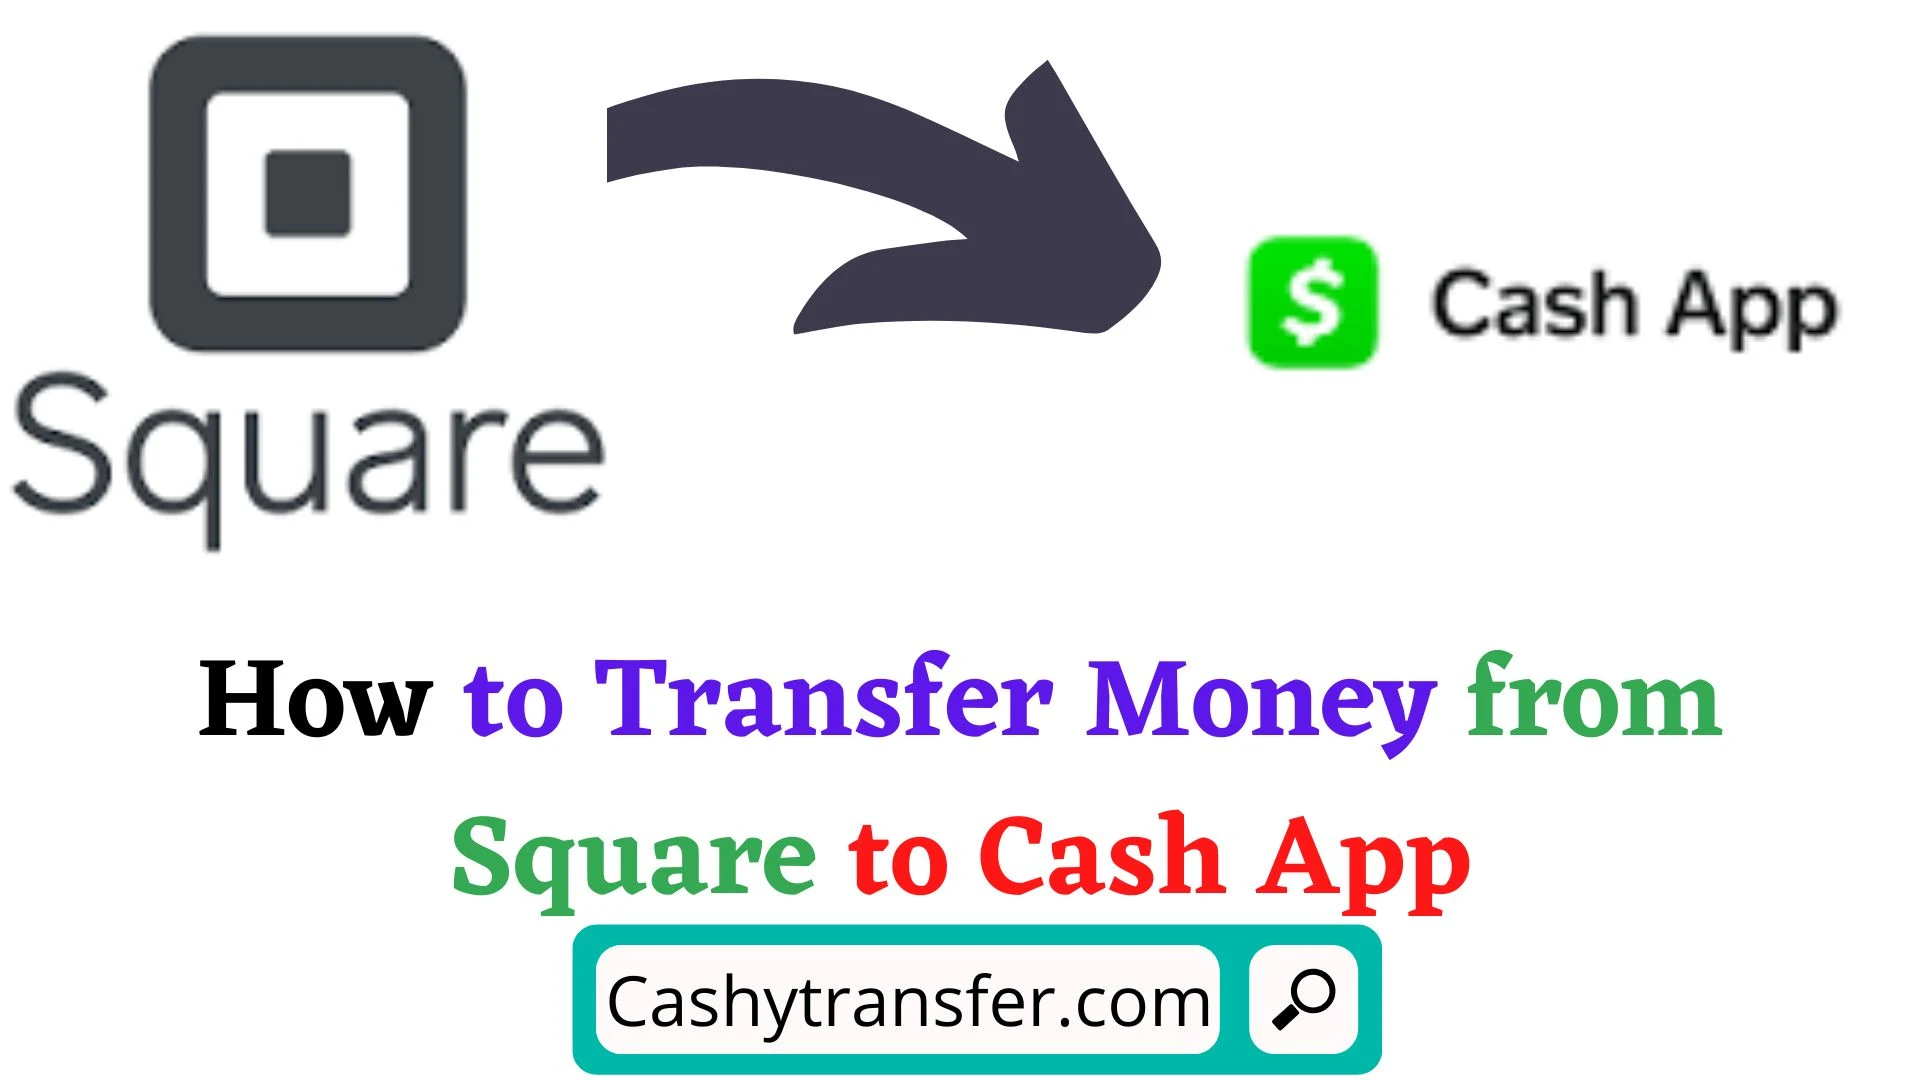 Transfer Money From Square To Cash App